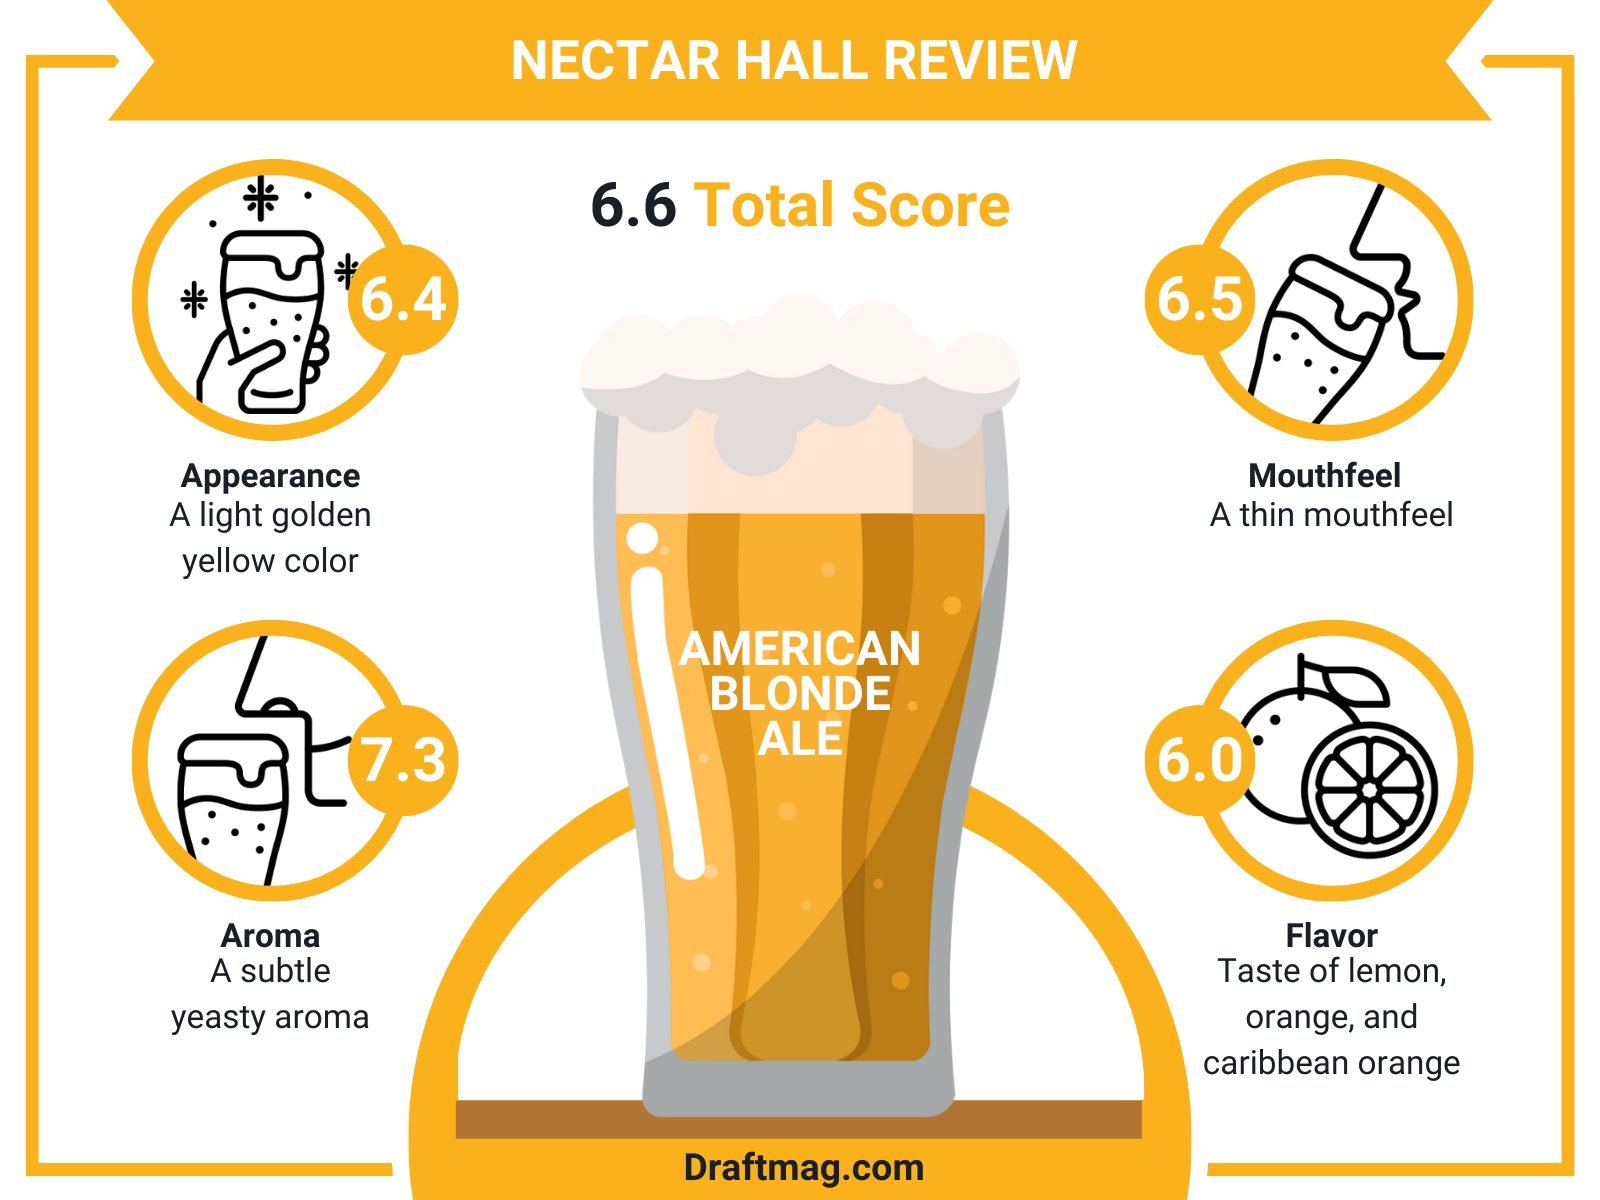 Nectar Hall Review Infographic